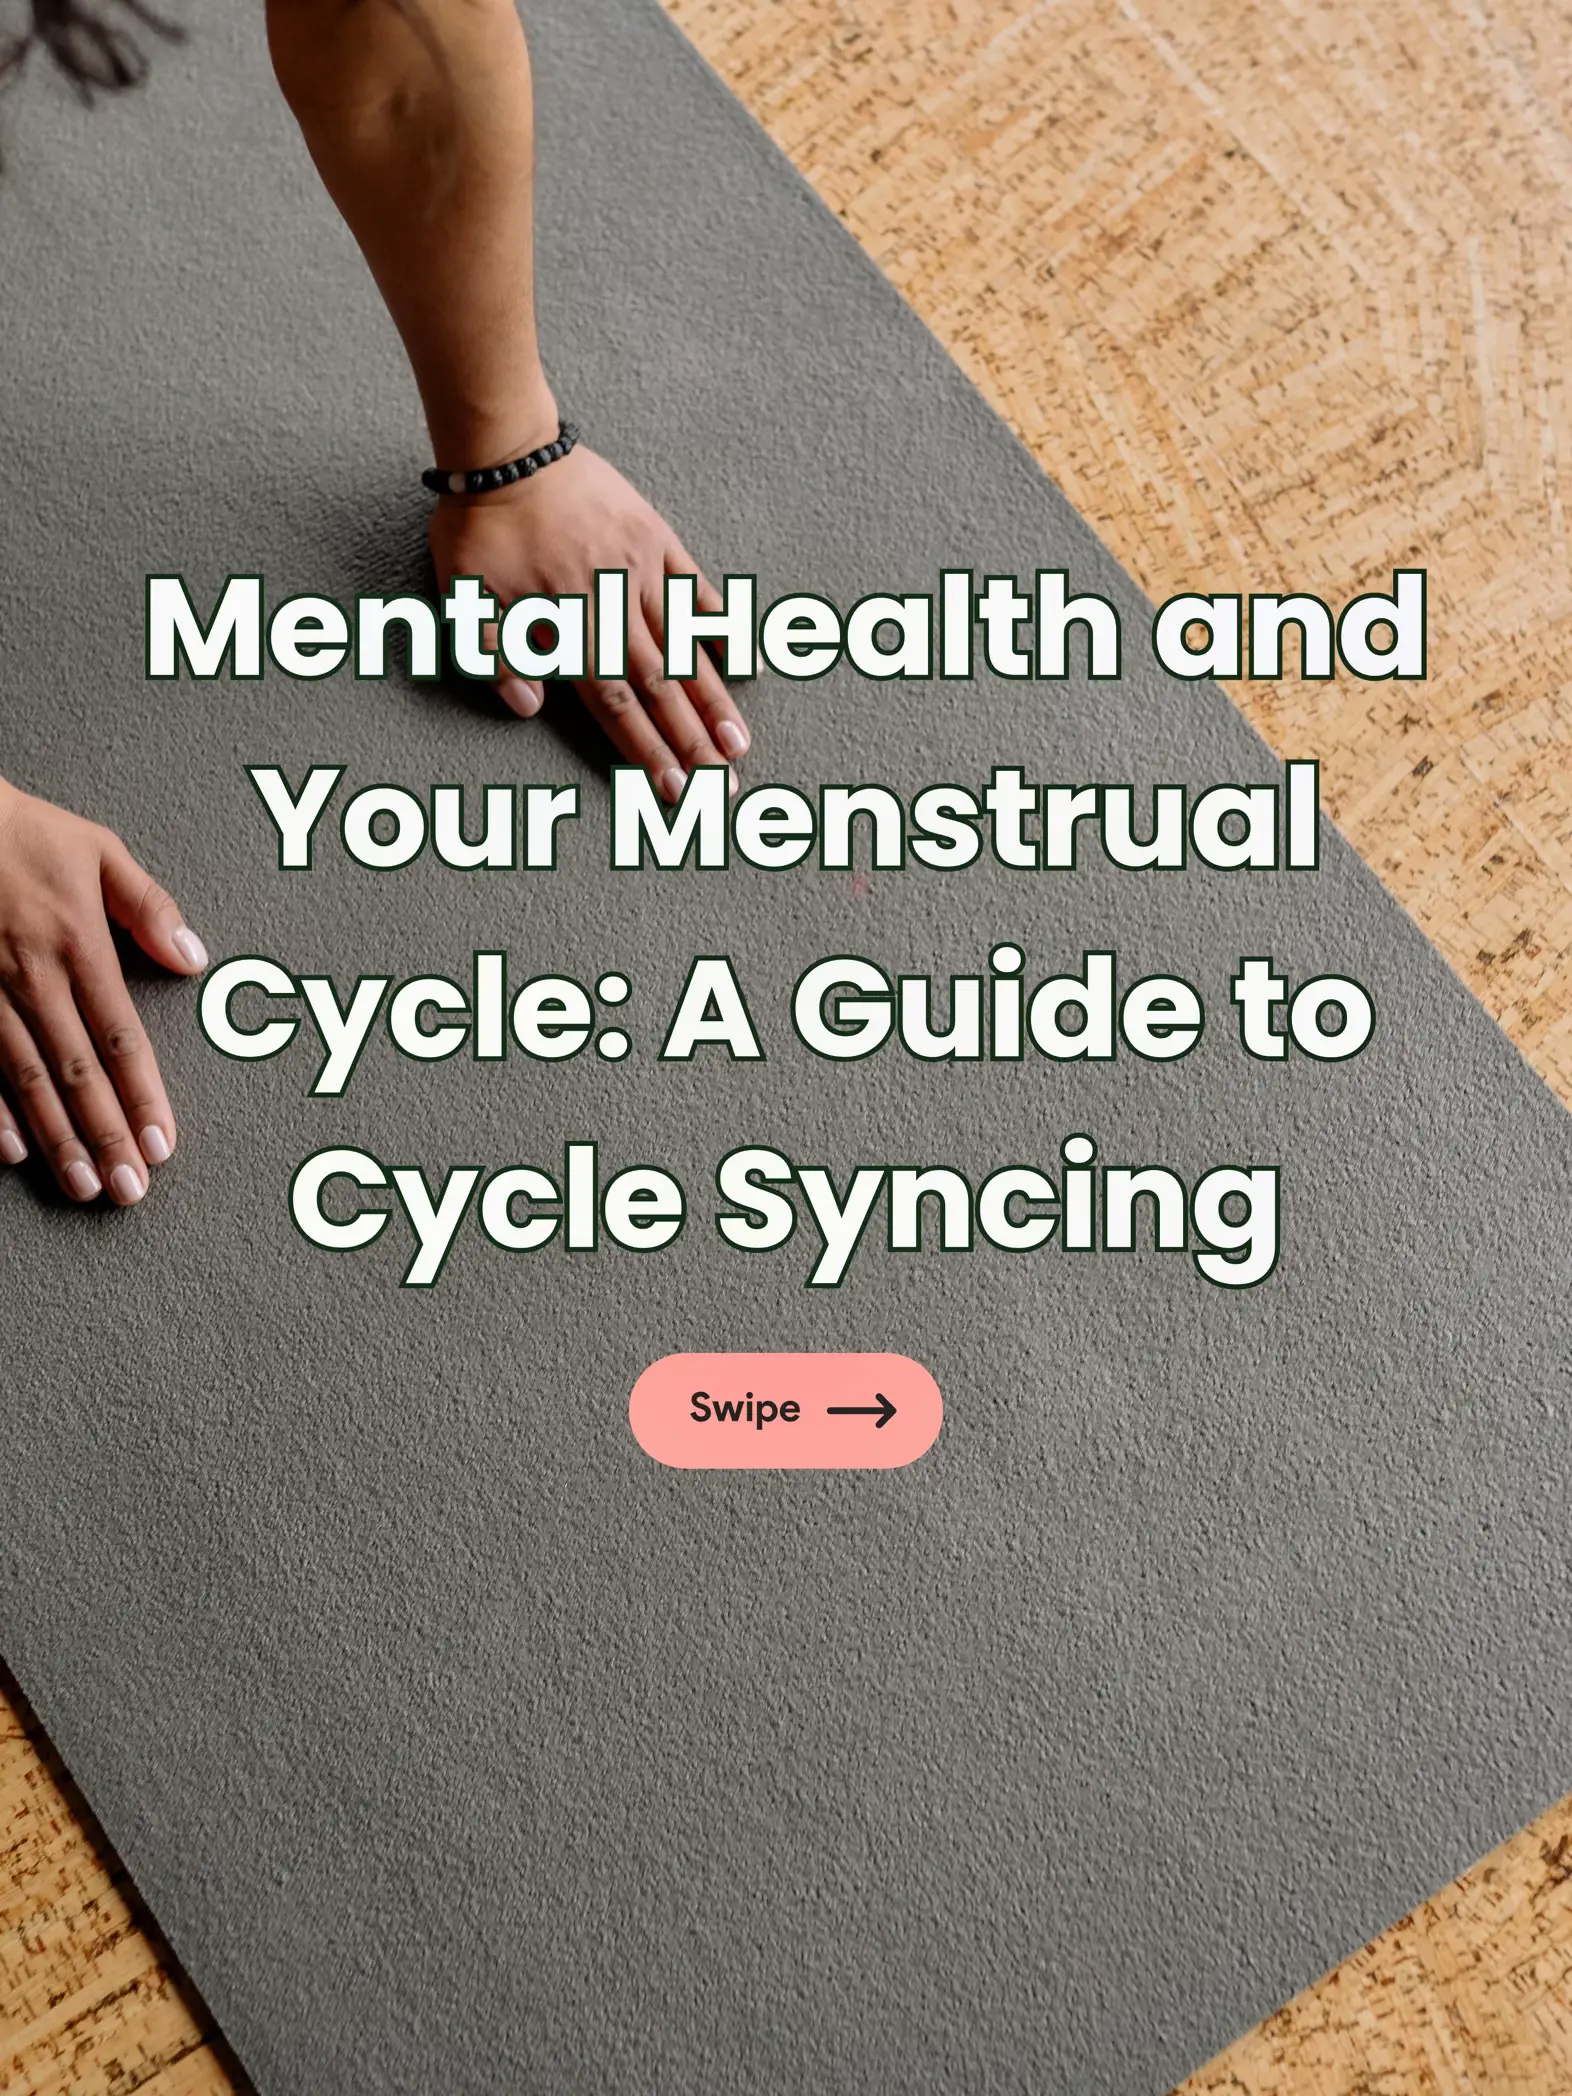 A guide to cycle syncing: Luteal phase 🌸, Gallery posted by Lisa  Vercetti🪐